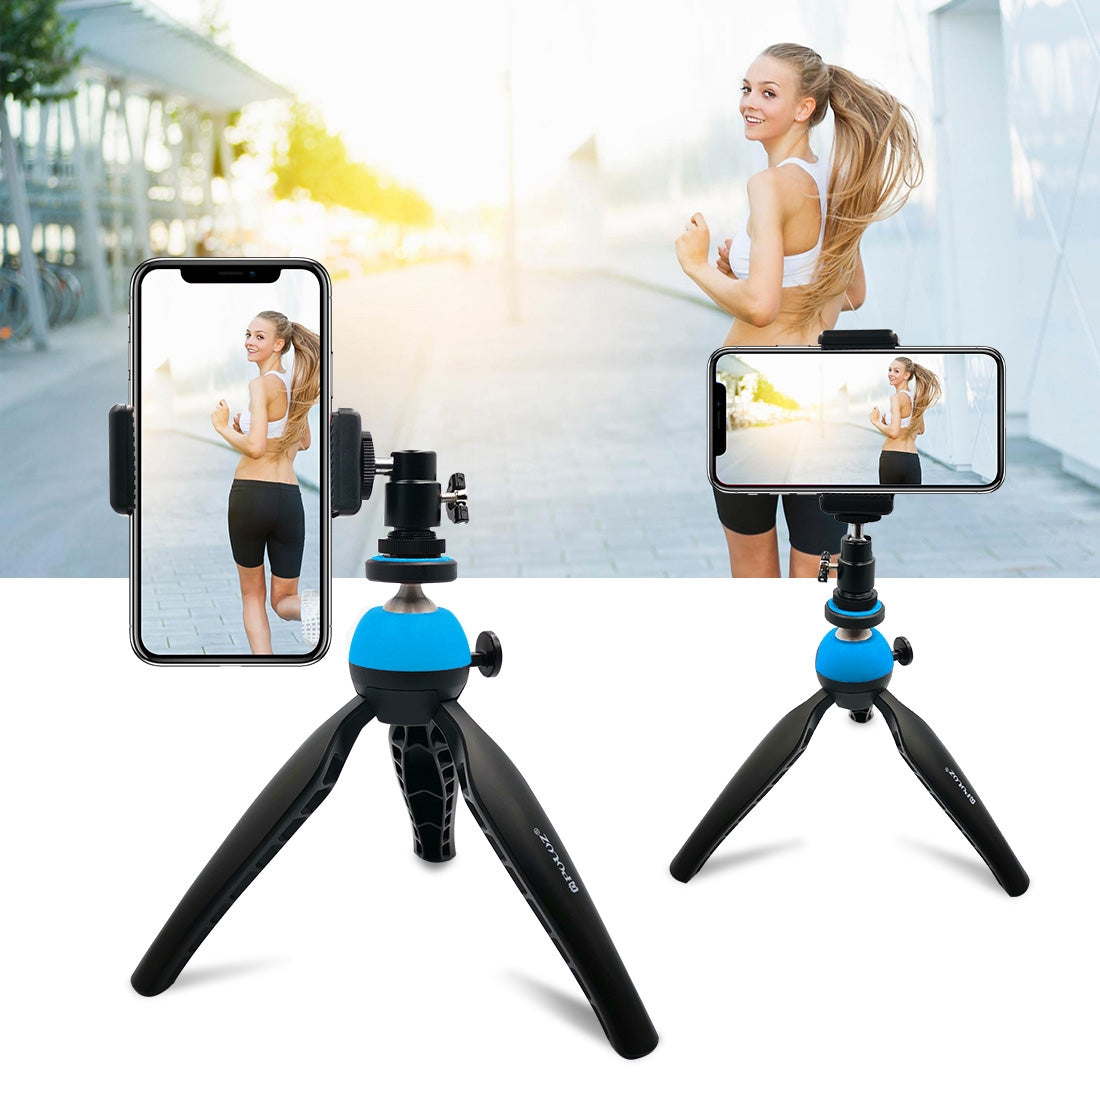 Pocket Mini Tripod Mount with 360 Degree Ball Head for Smartphones, GoPro, DSLR Cameras(Blue)